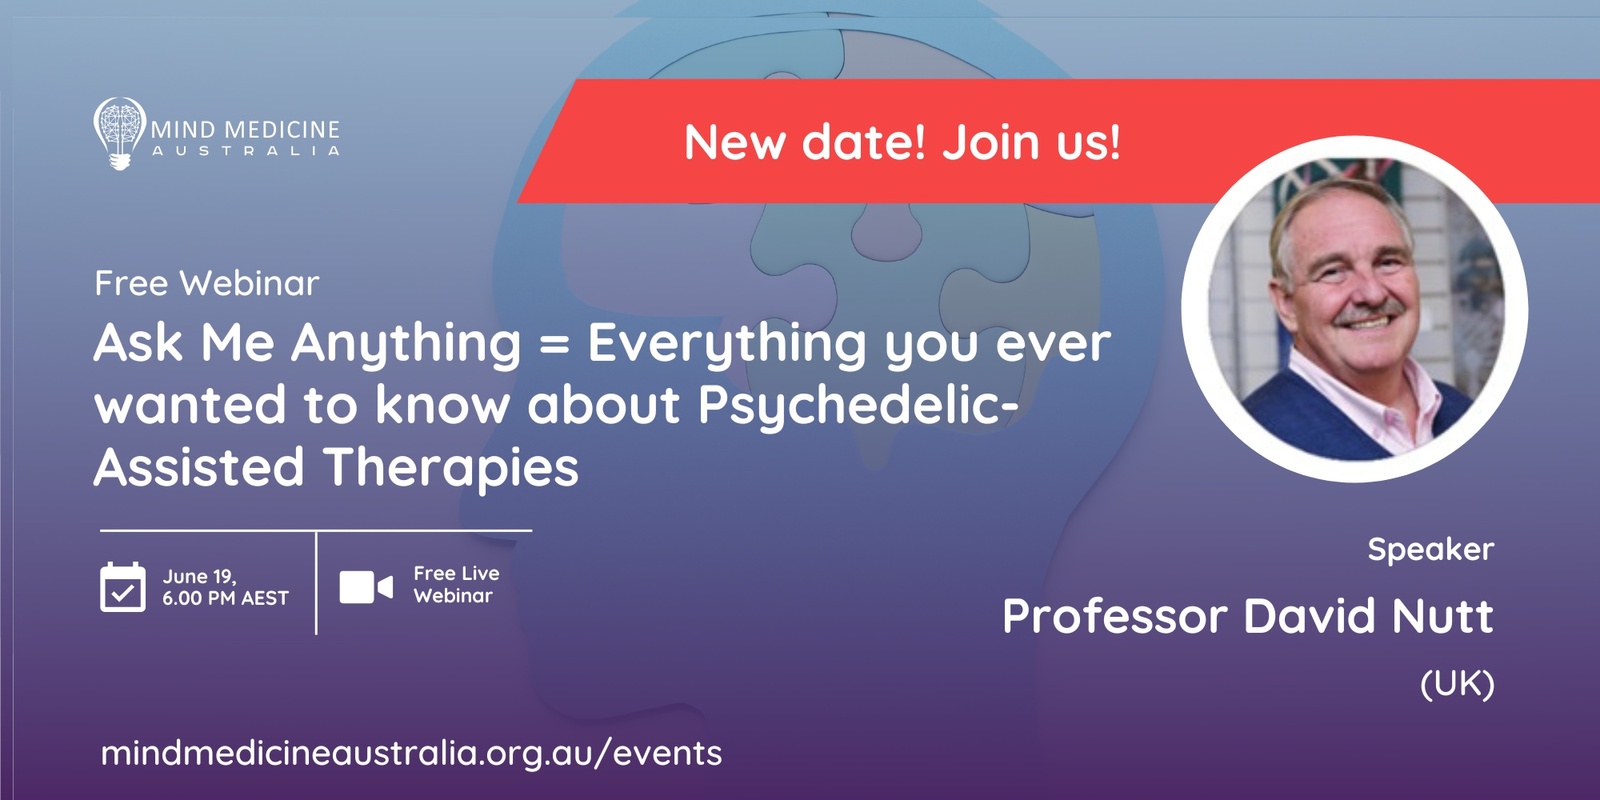 Banner image for NEW DATE! Mind Medicine Australia FREE Webinar: Ask Me Anything = Everything you ever wanted to know about Psychedelic-Assisted Therapies with Professor David Nutt (UK)